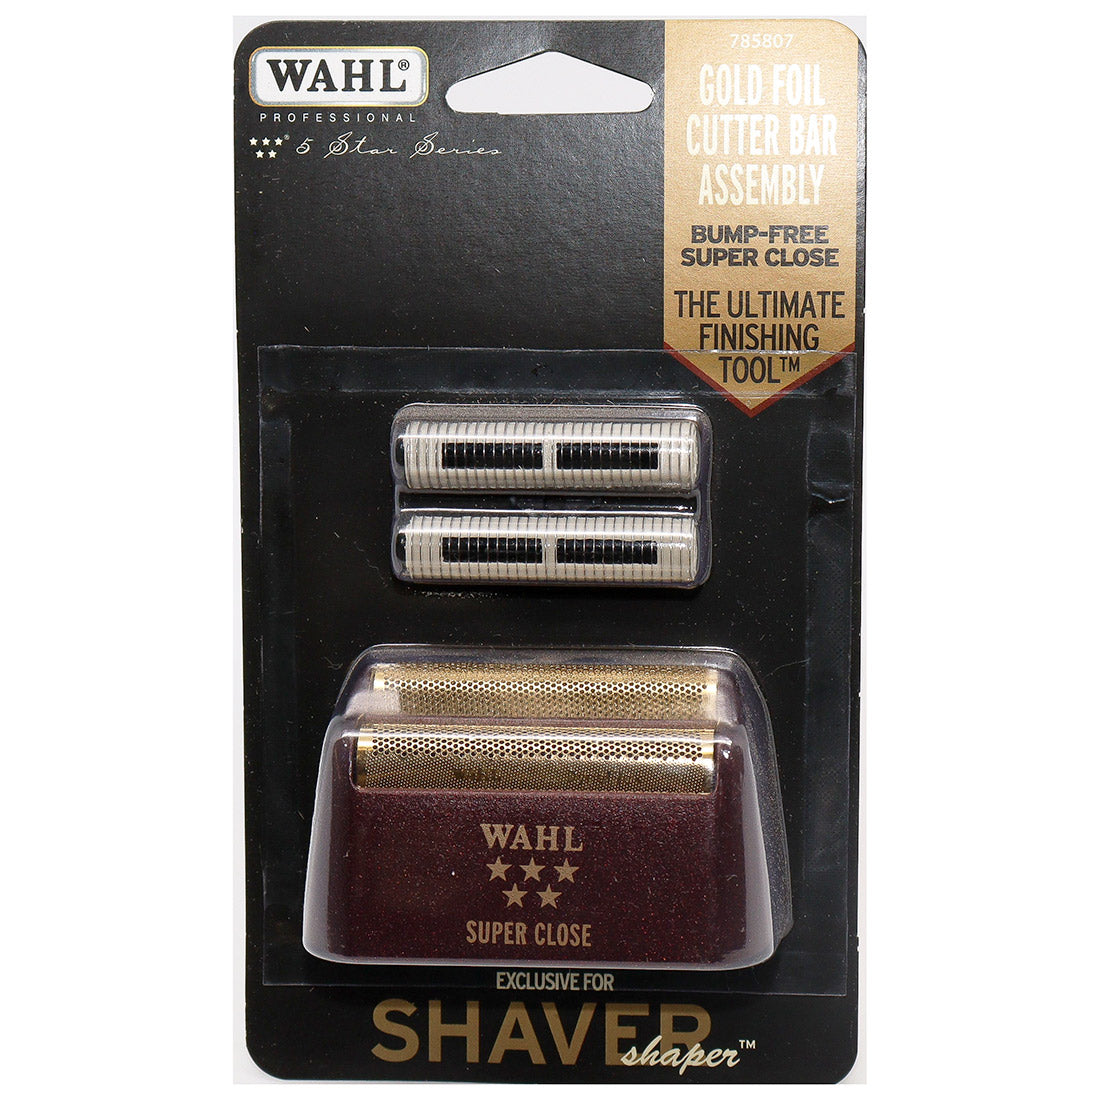 Wahl Shaver/Shaper Replacement Foil & Cutter Bar Assembly Package